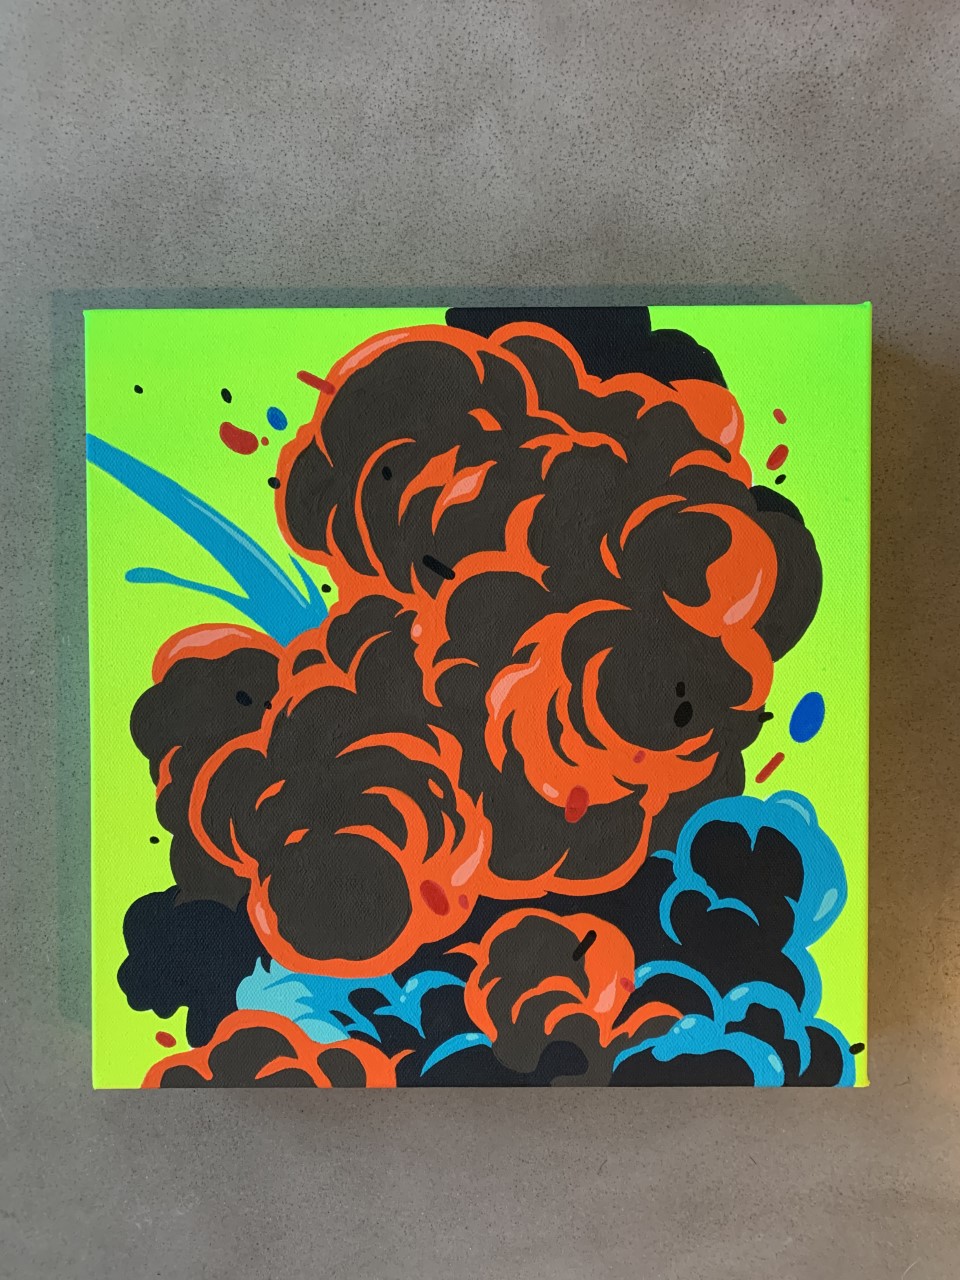 'Chemical', 12x12' Gallery Wrapped Canvas by Nover, 2020.